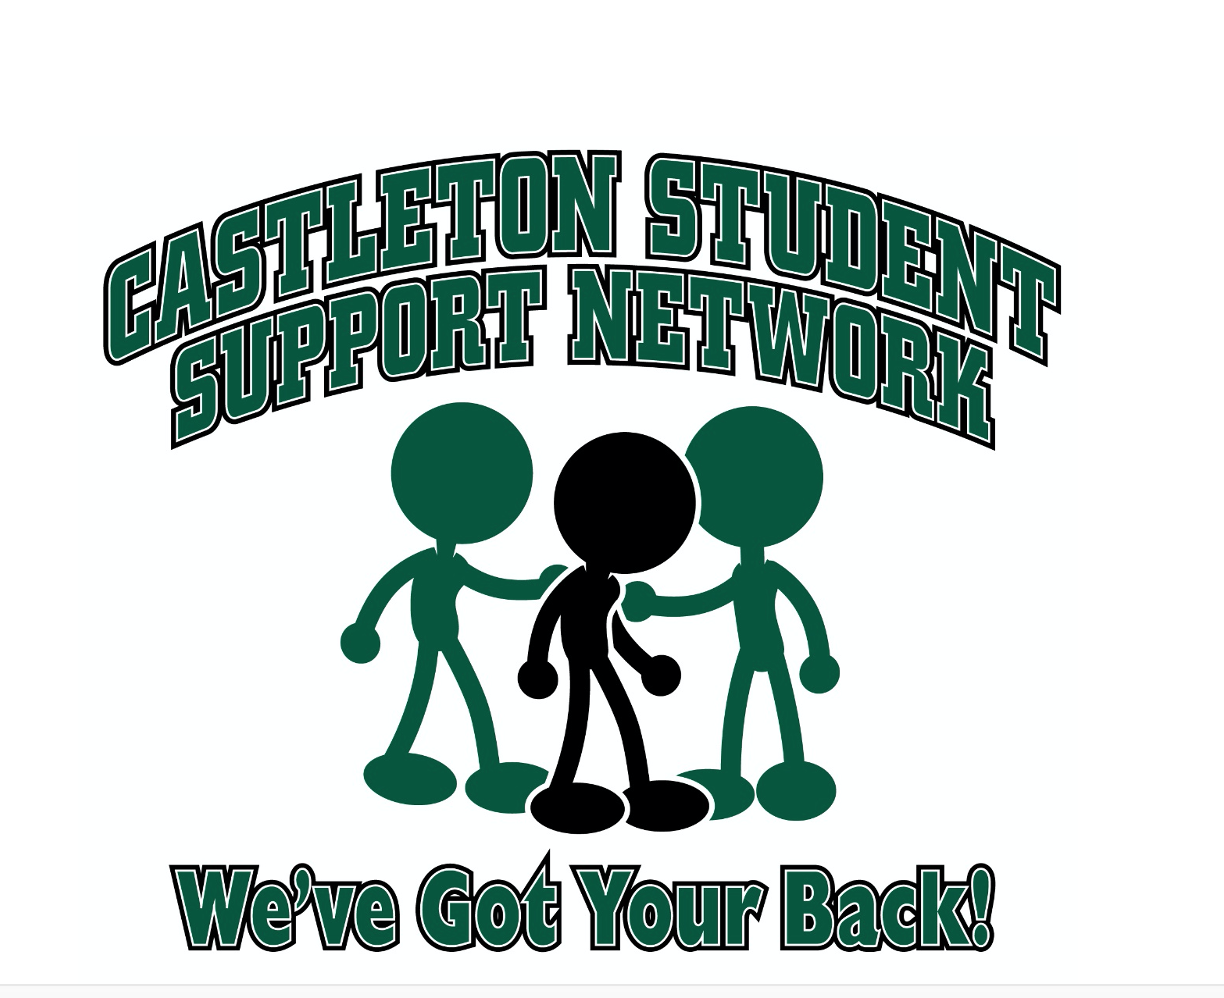 Join the Student Support Network!